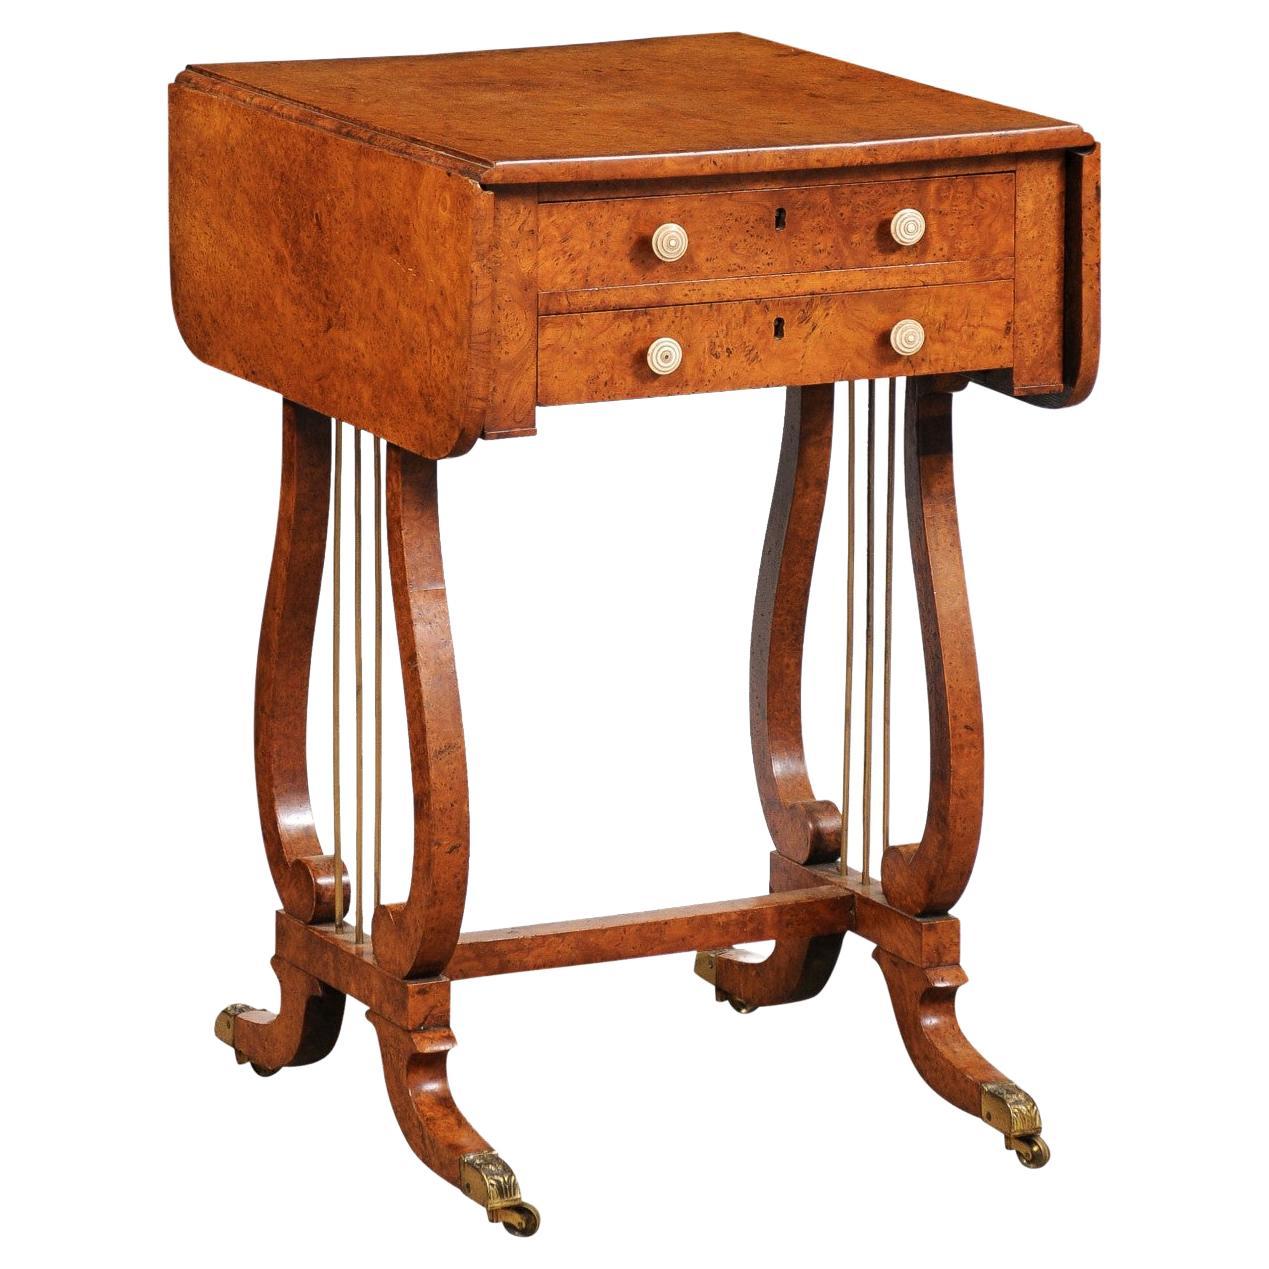 Early 19th Century Baltic Sewing Table in Birch with Drop Leaves, 2 Drawers